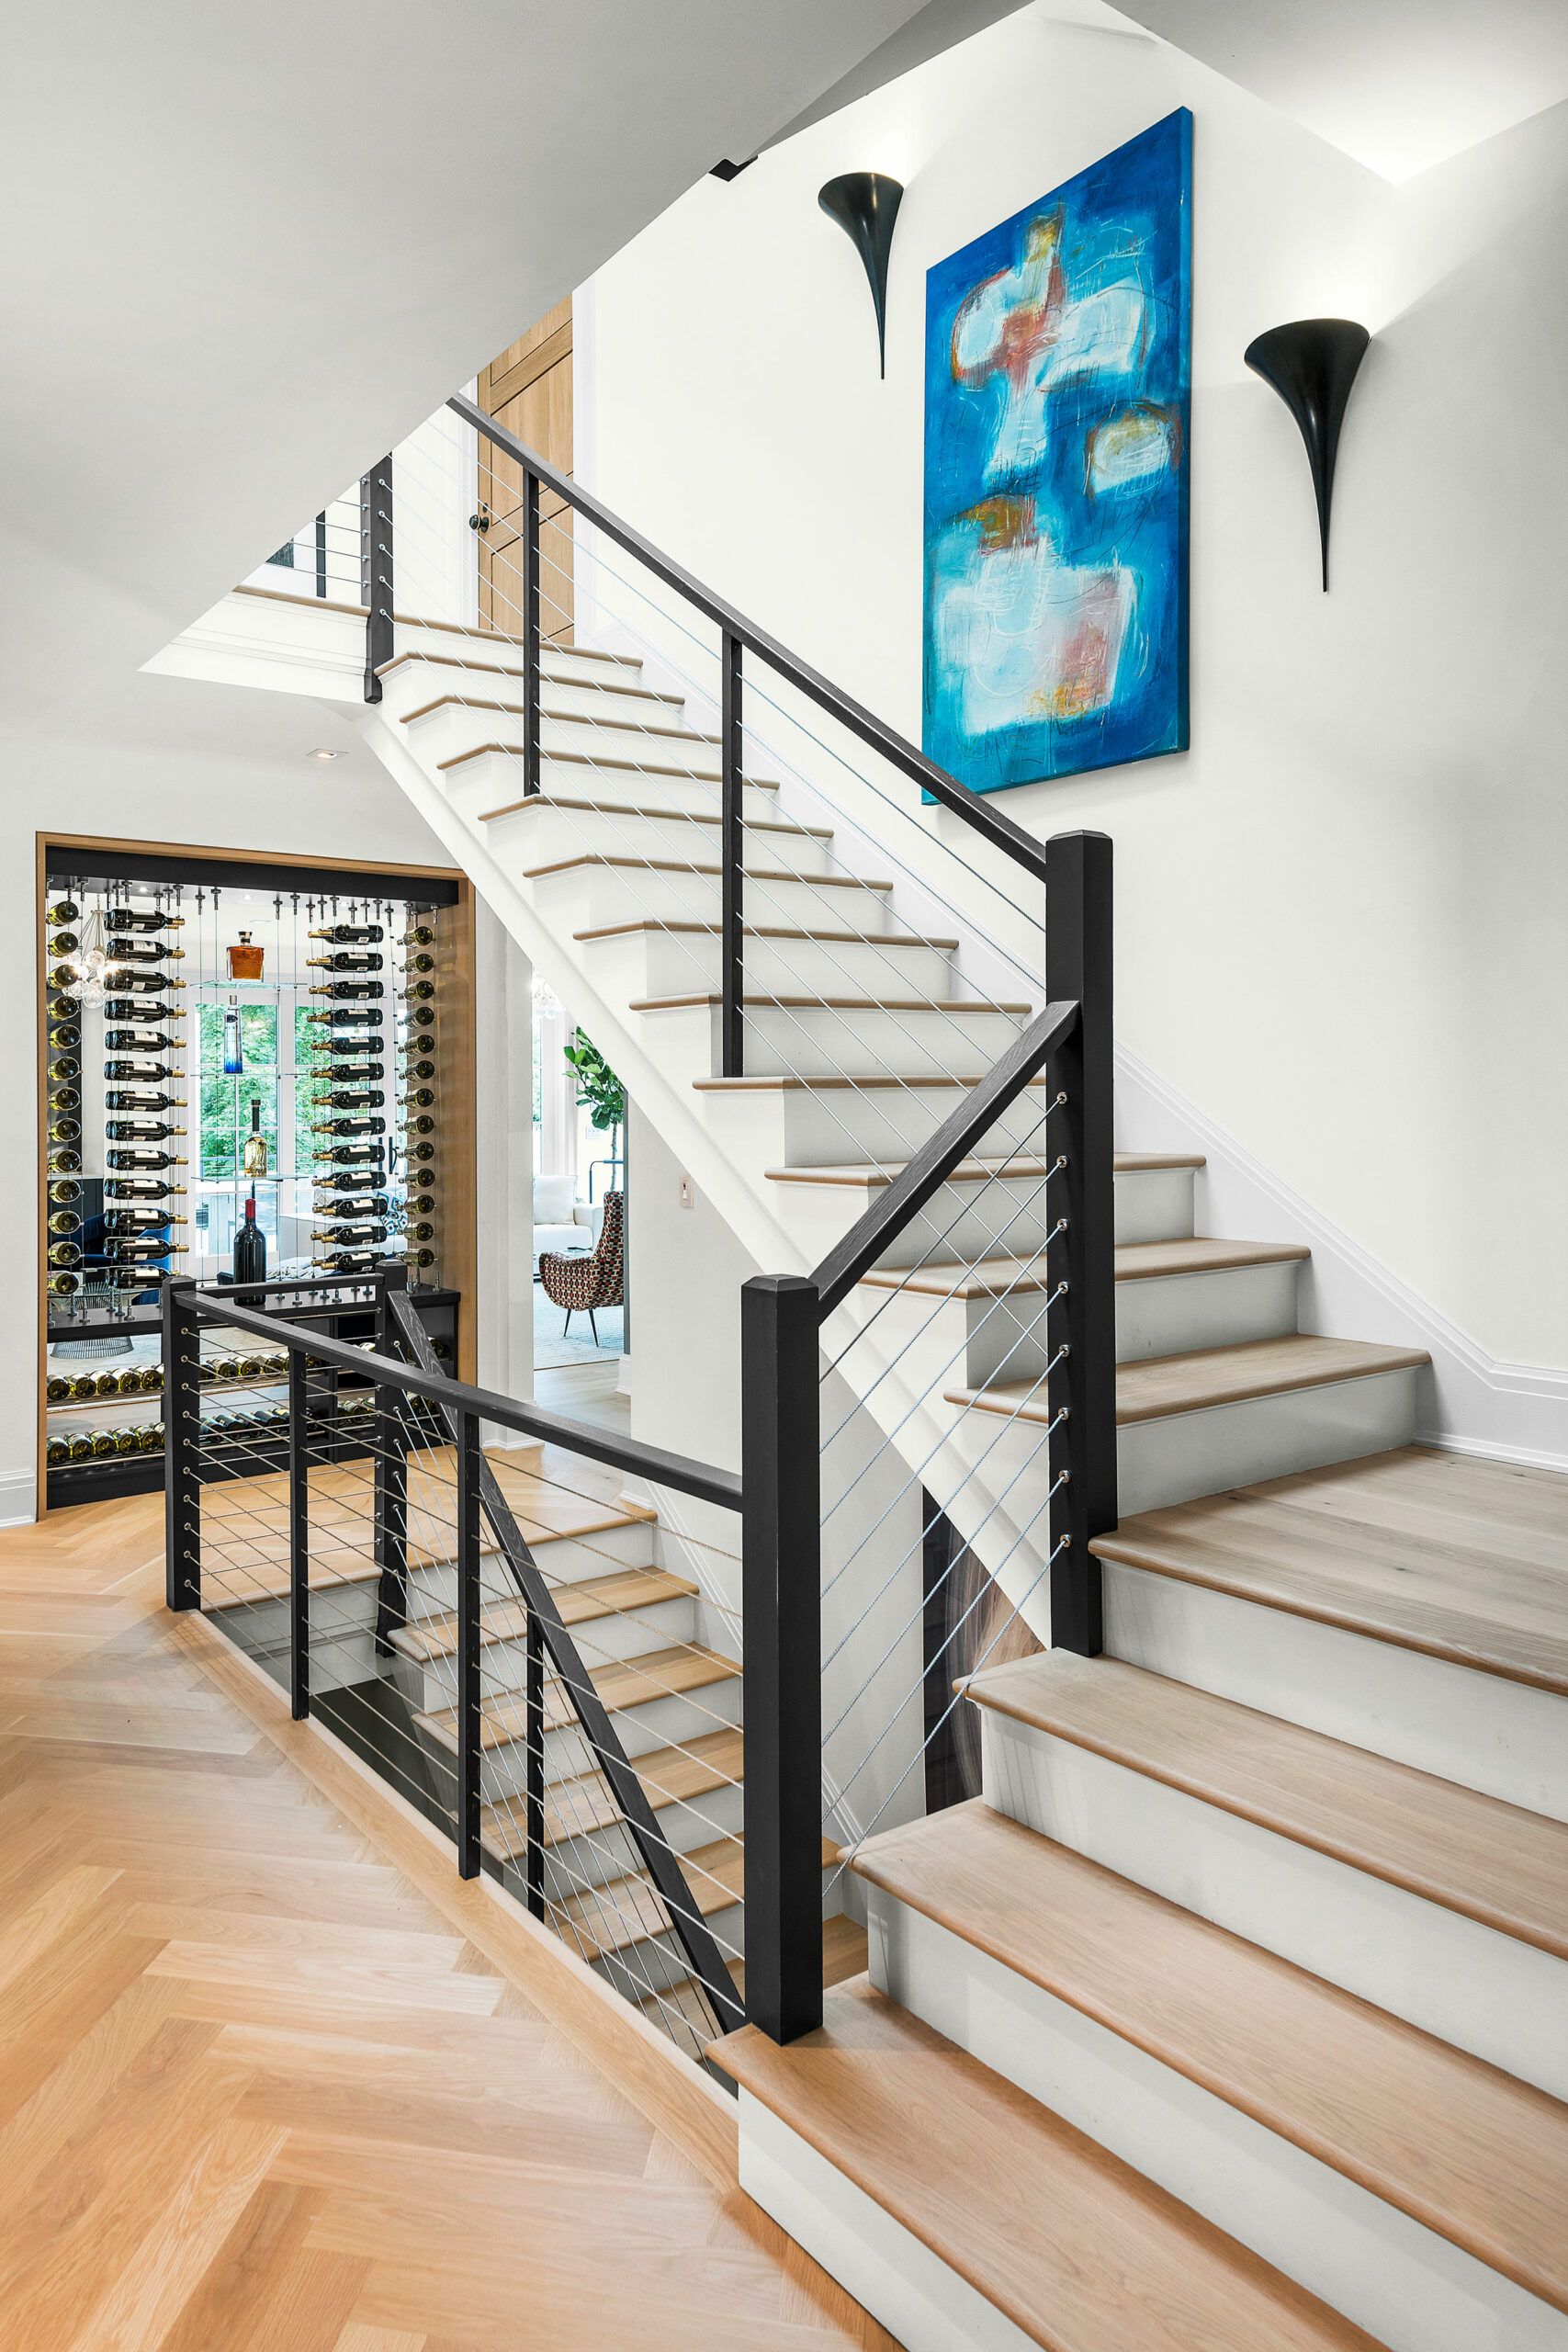 32 Stair Railing Ideas to Elevate Your Home's Style